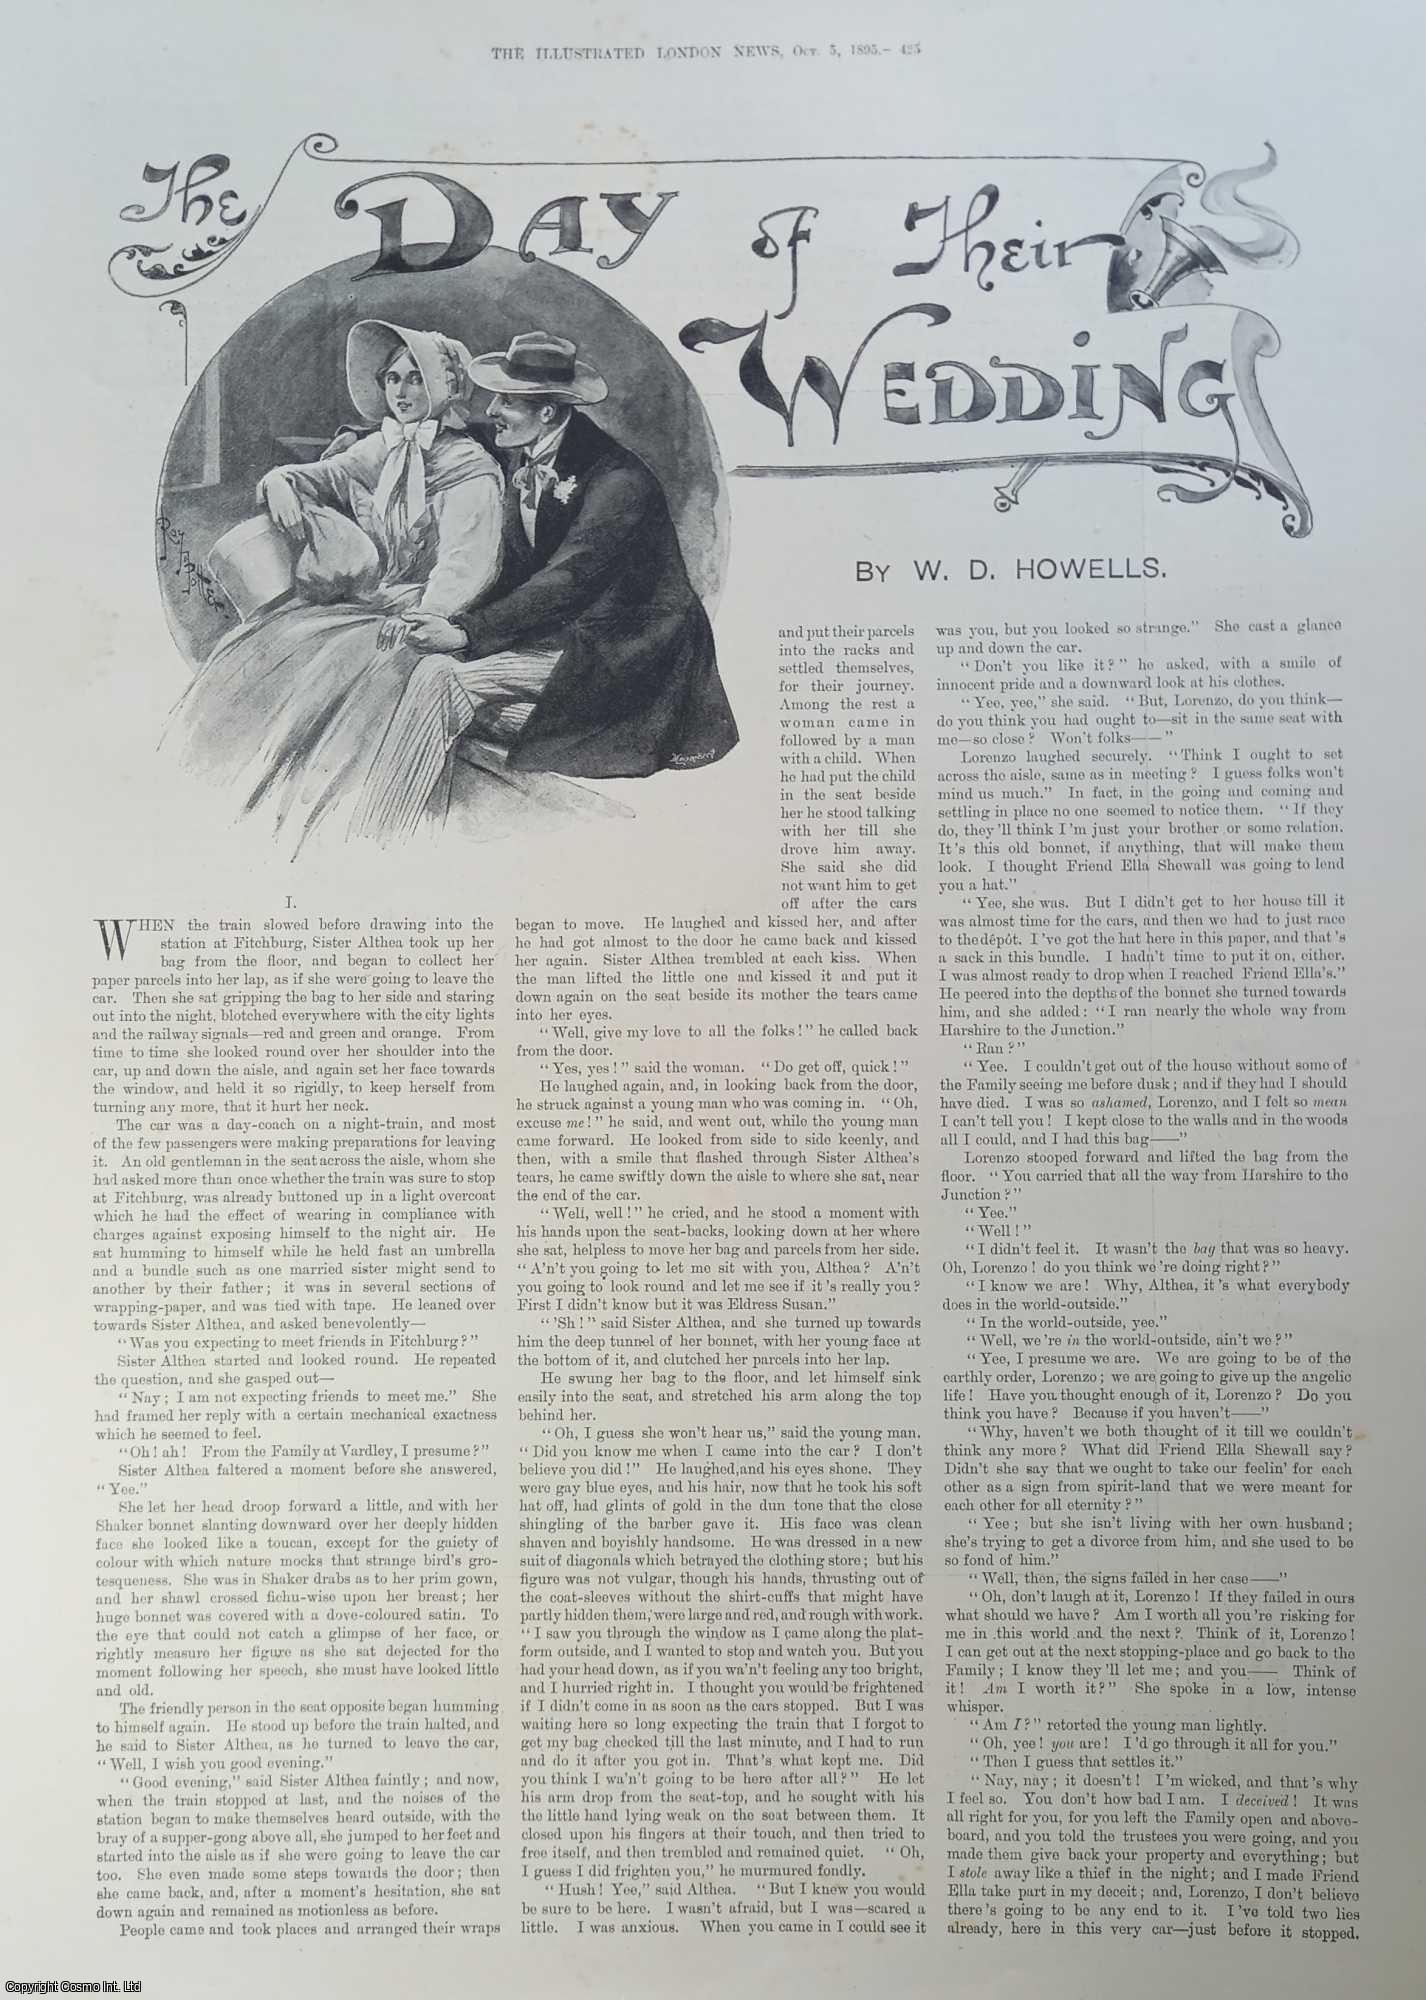 W.D. HOWELLS - The Day of Their Wedding. A complete short story from The Illustrated London News, 1895.